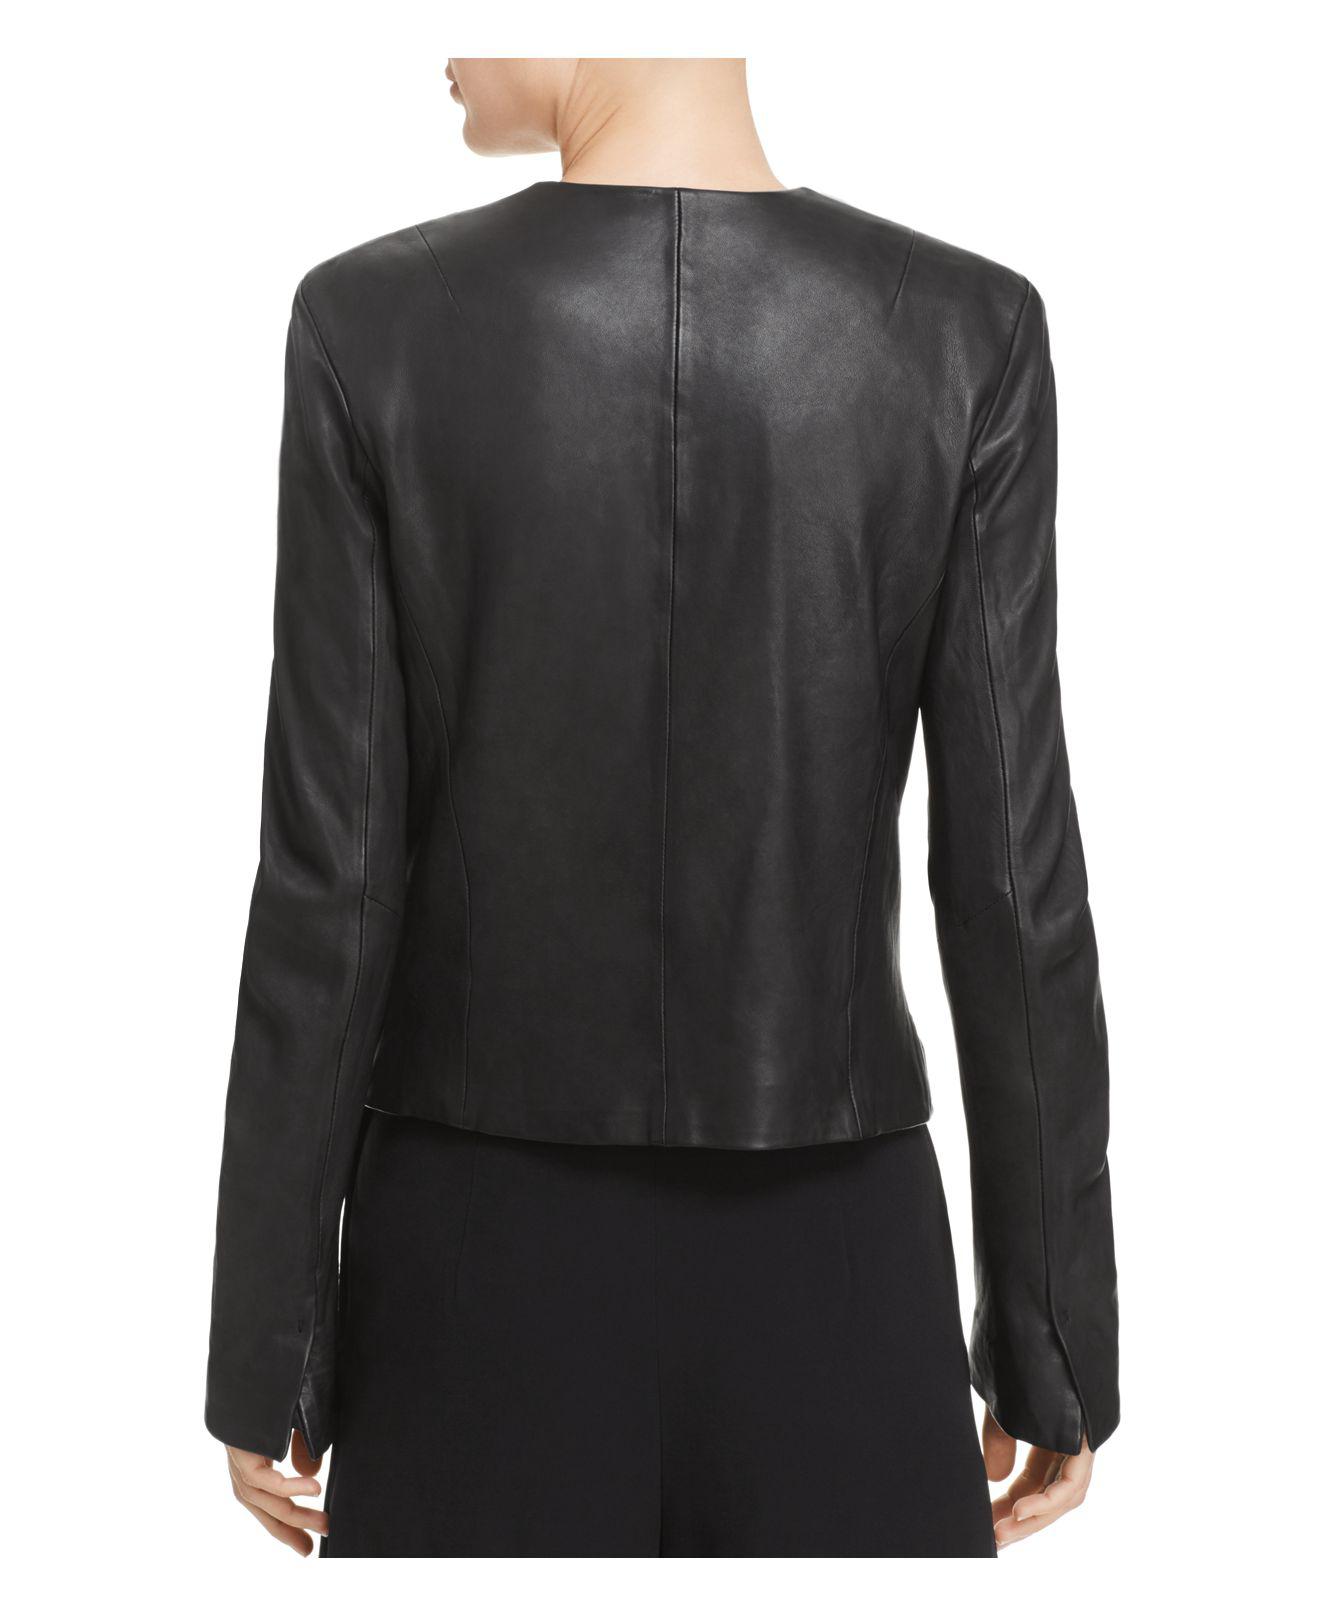 Lyst - Vince Collarless Leather Jacket in Black